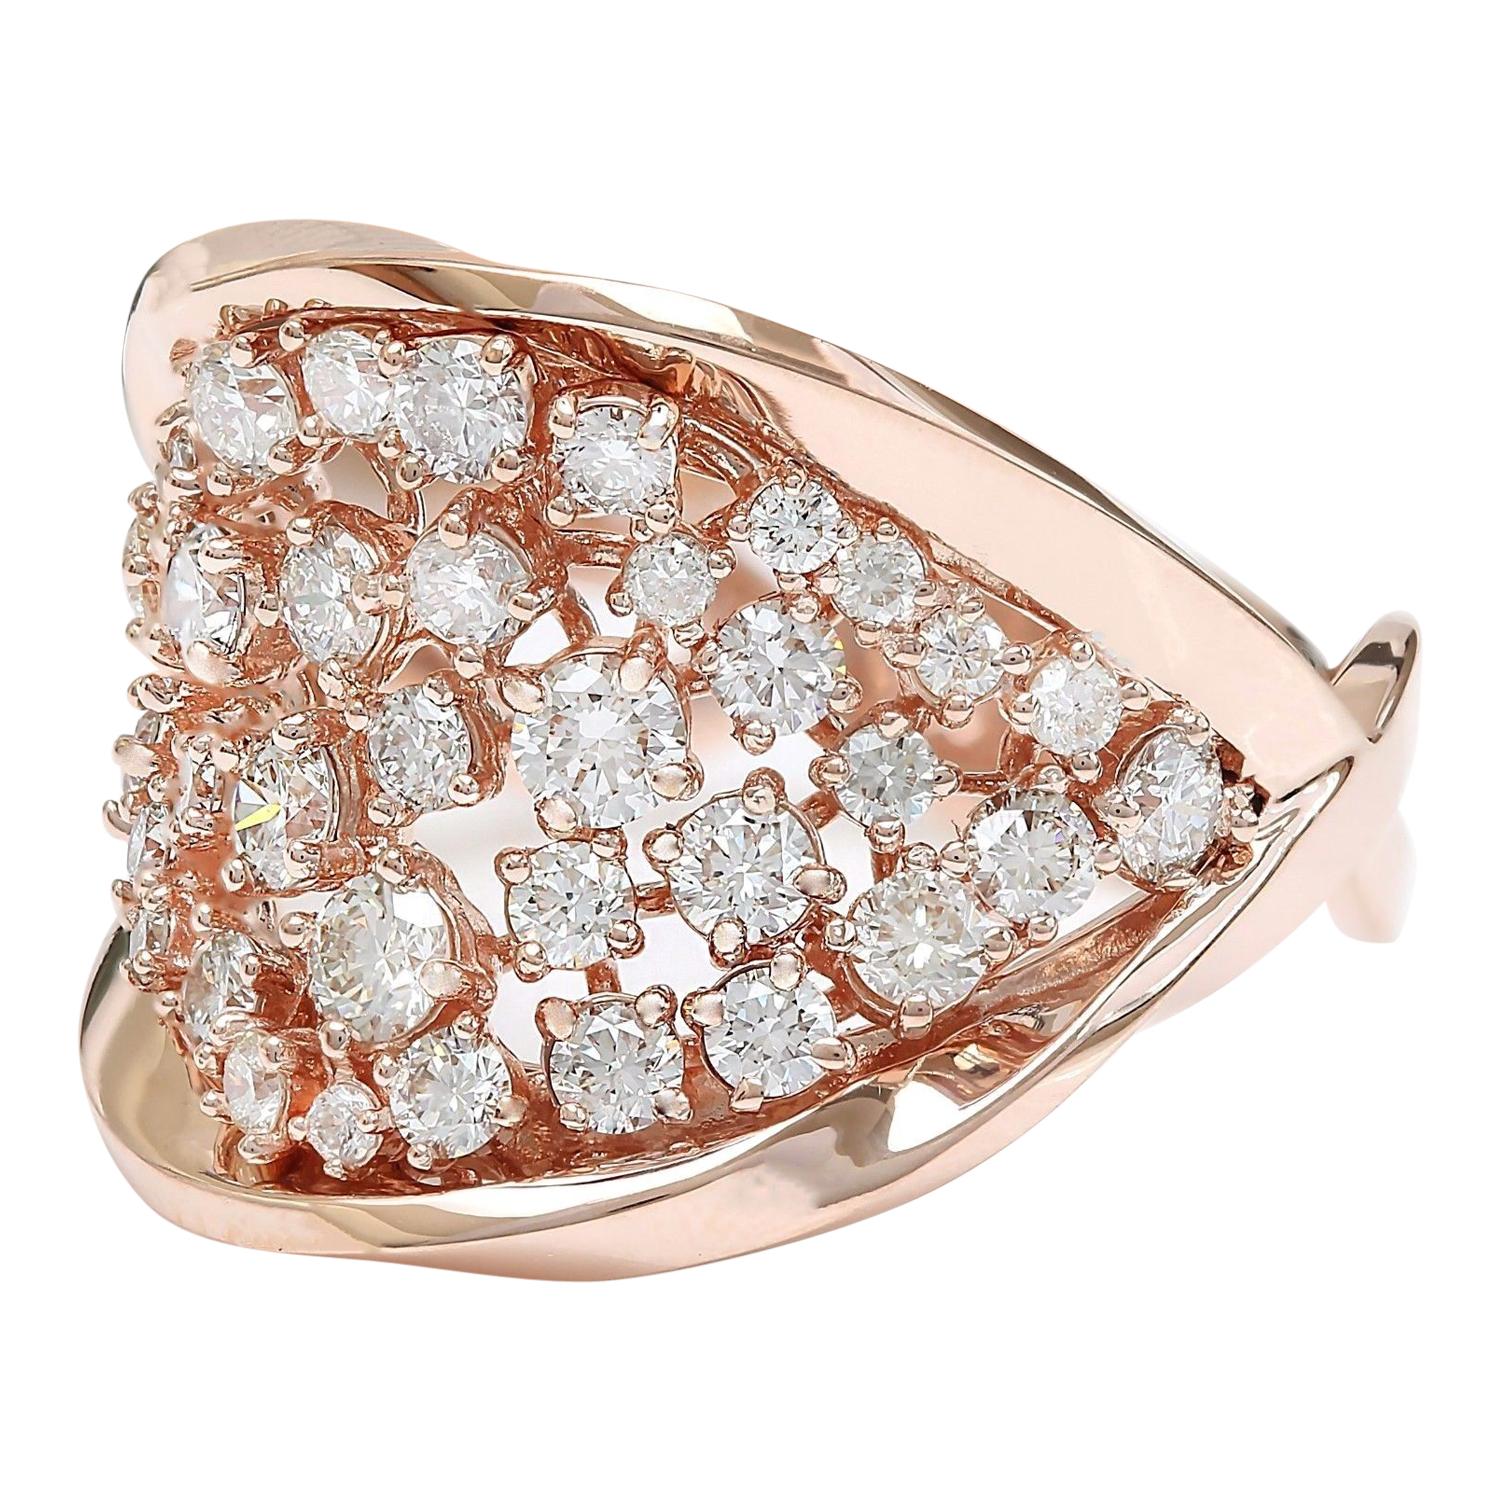 1.40 Carat Natural Diamond 14K Solid Rose Gold Ring
 Item Type: Ring
 Item Style: Statement
 Material: 14K Rose Gold
 Mainstone: Diamond
 Stone Color: F-G
 Stone Clarity: VS2-SI1
 Stone Weight: 1.40 Carat
 Stone Shape: Round
 Stone Creation Method: